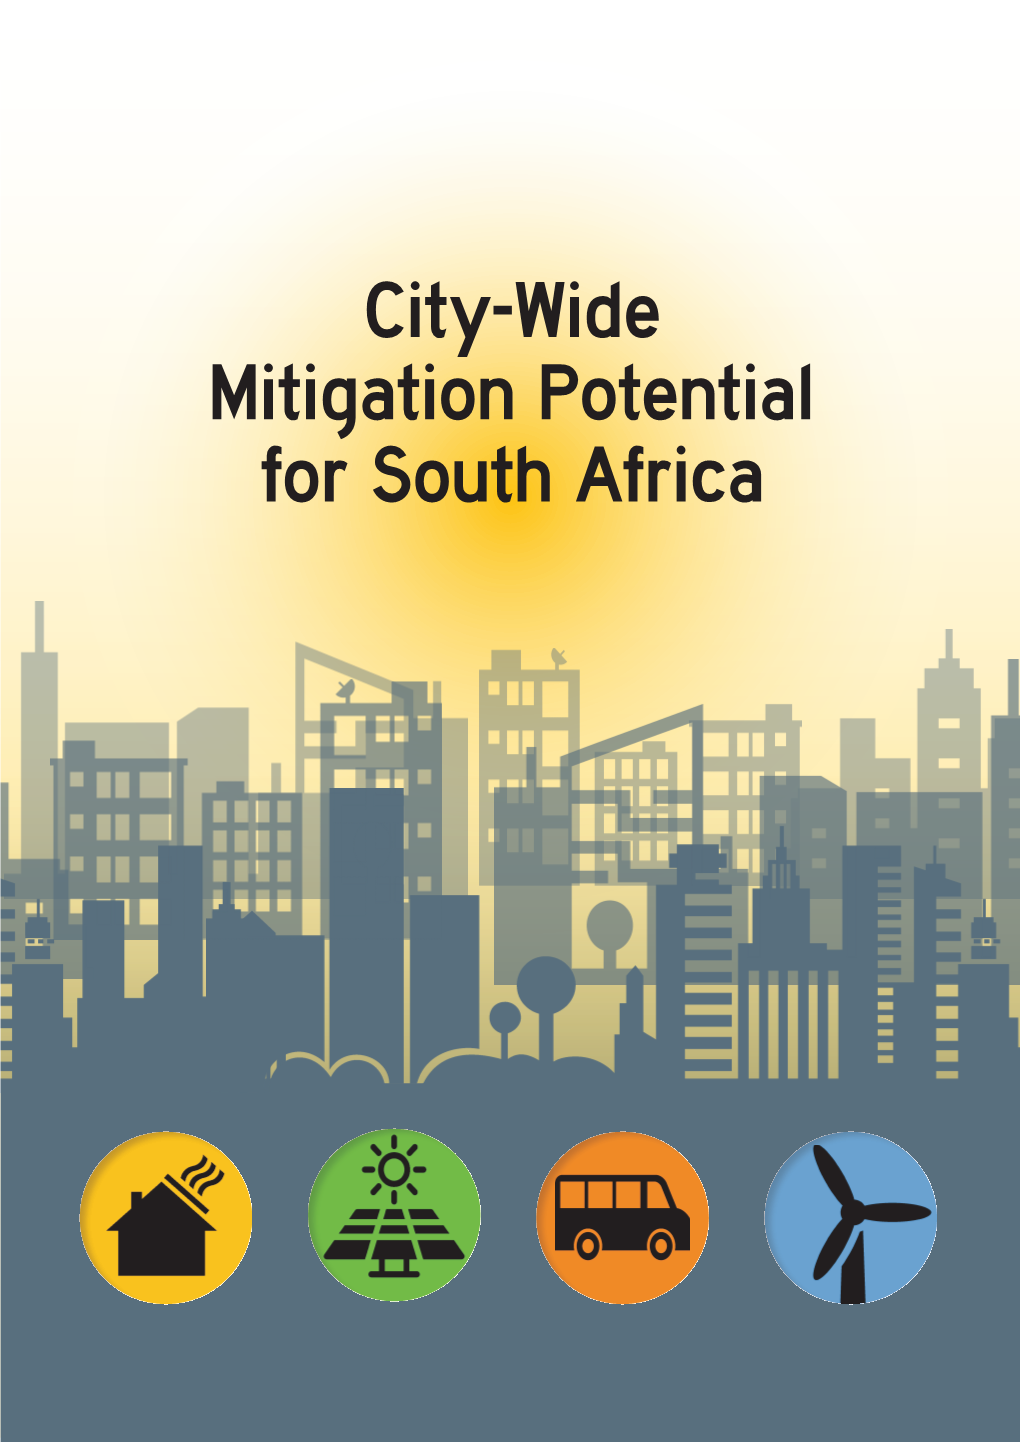 City-Wide Mitigation Potential for South Africa Published by Sustainable Energy Africa